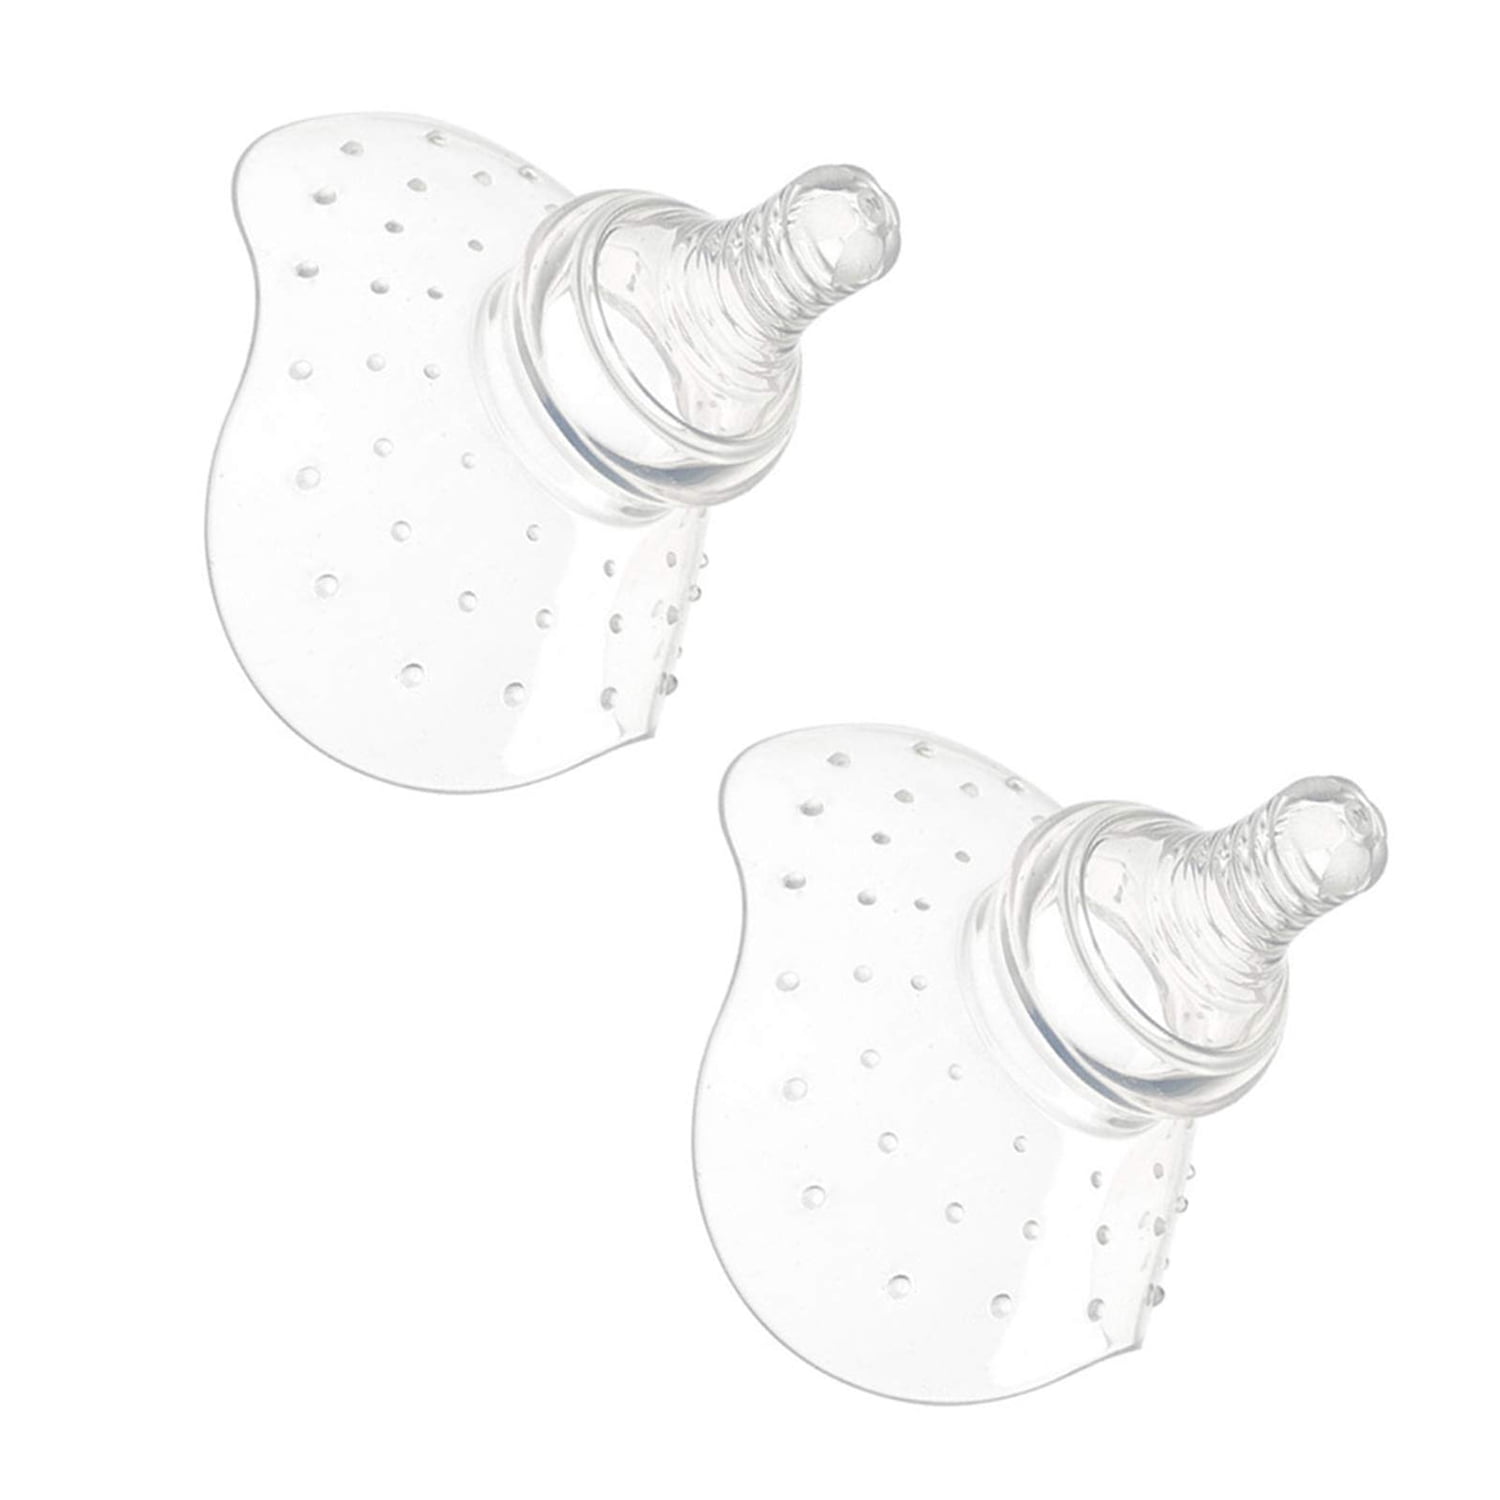 Natural Connection Nipple Shield, Open Ended Shield